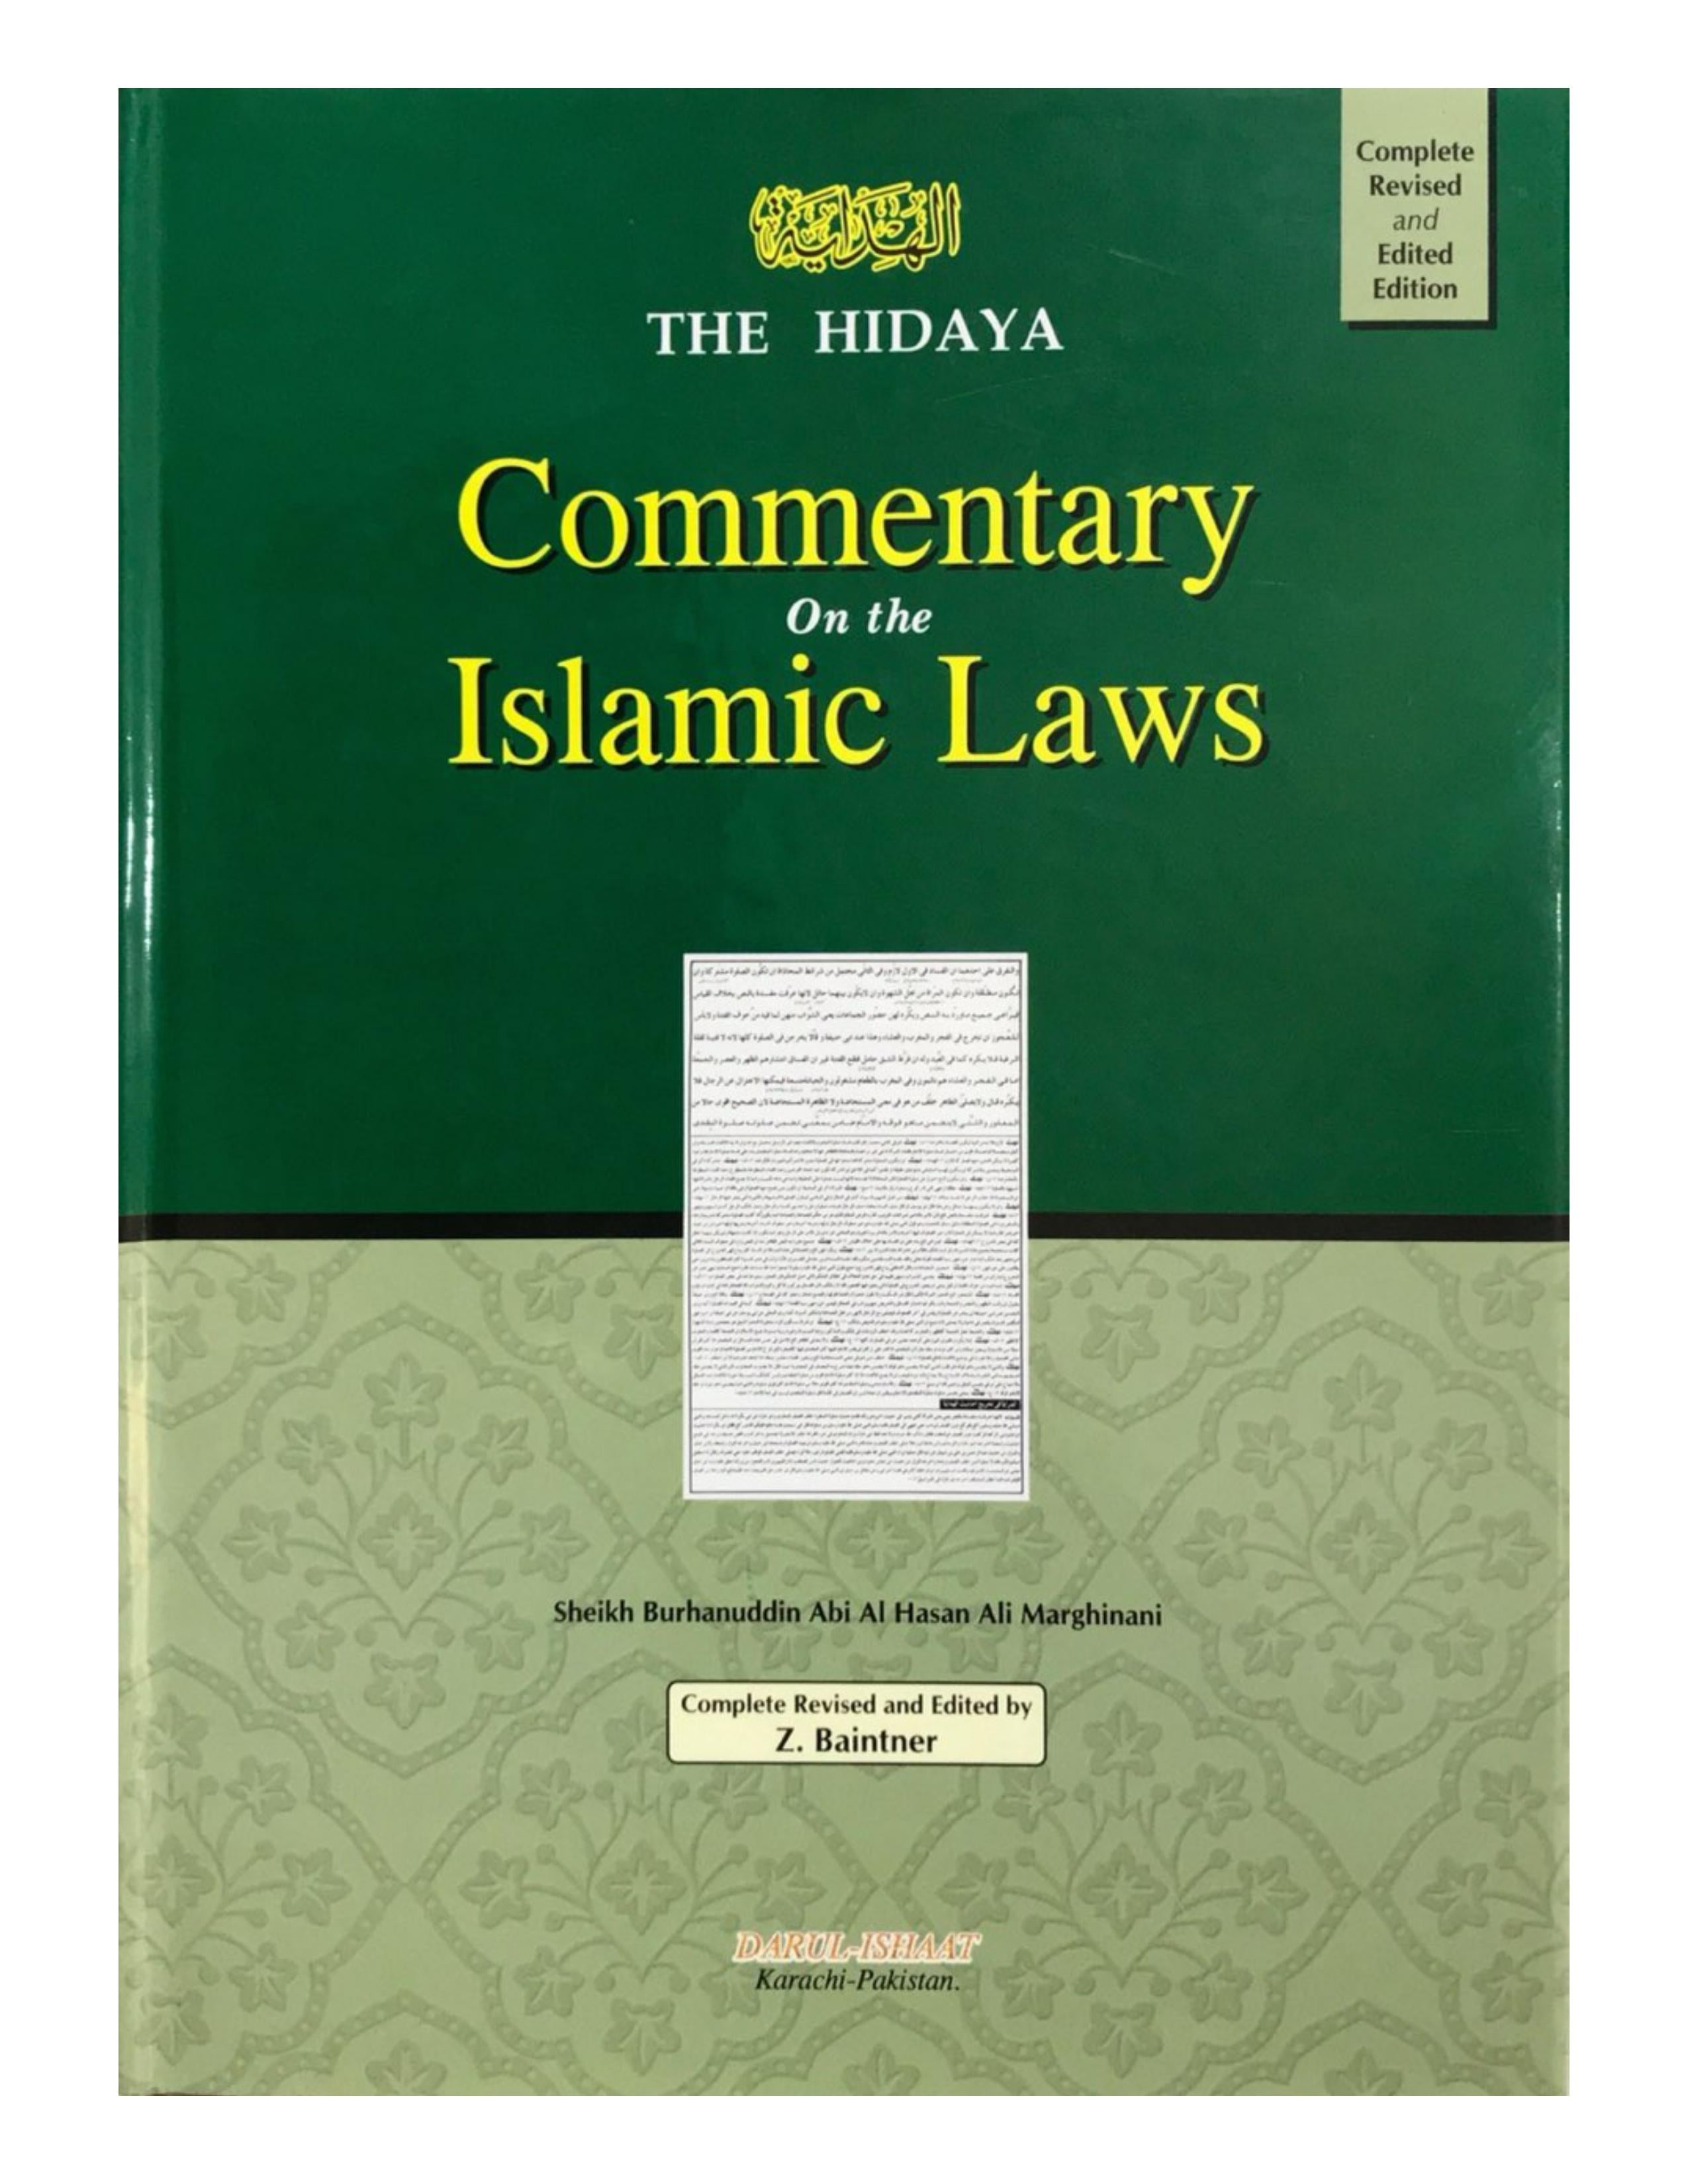 The Hidaya: Commentary on the Islamic Laws